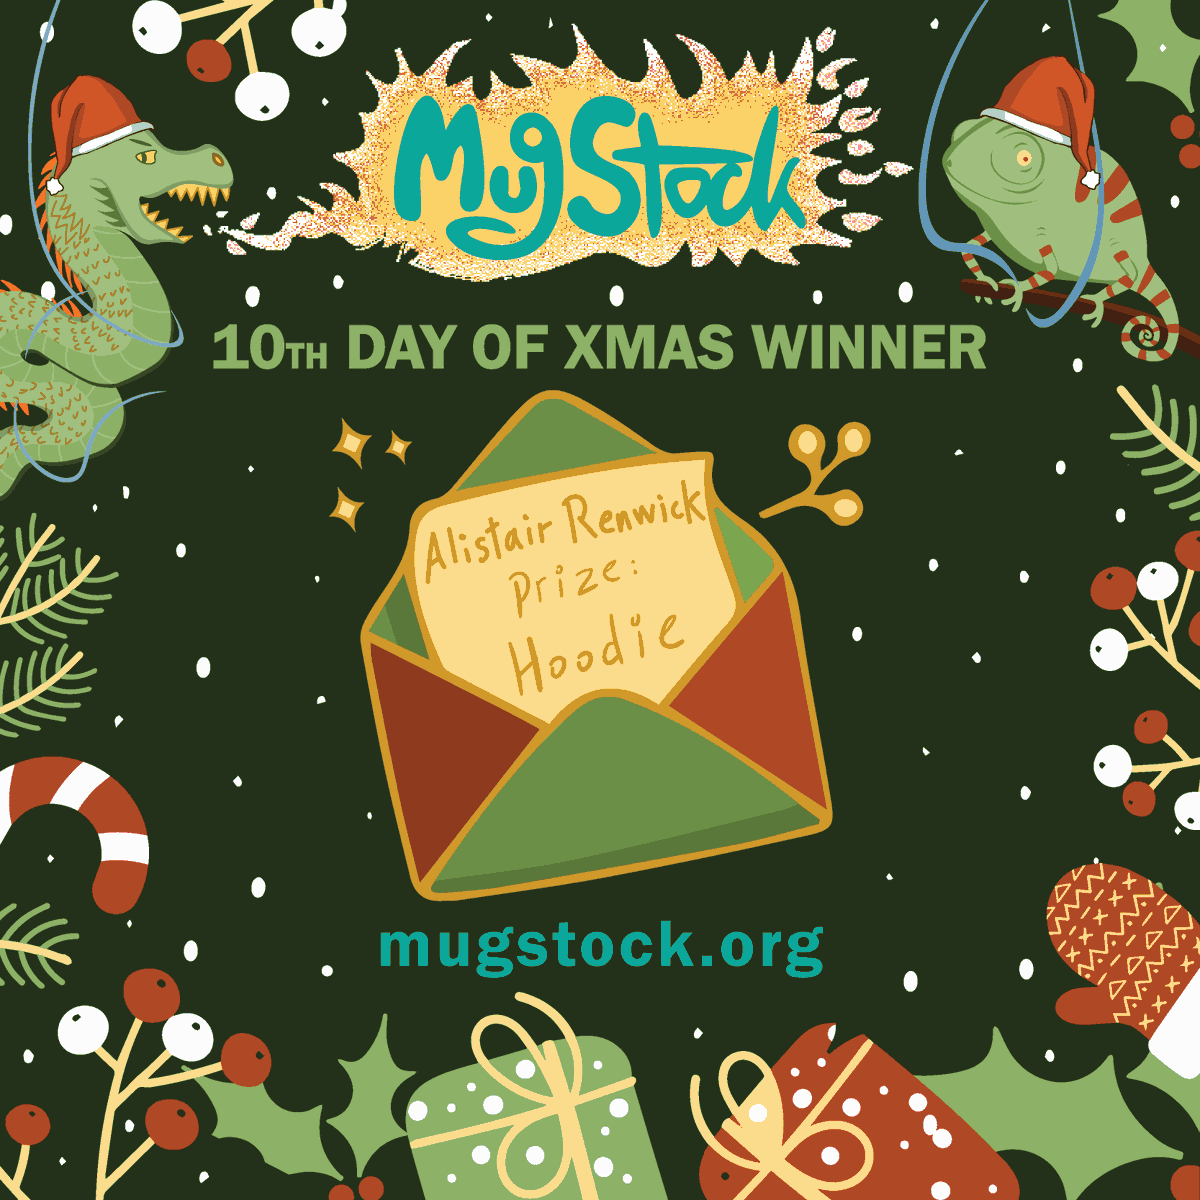 Congratulations to the 10th winner of our 12 Days of Christmas Giveaway! 🎉 There's still 2 gifts up for grabs: 🎁🎁 1 x MugStock T-Shirt 👕 1 x Pair of Adult Weekend Tickets 🎟️🎟️ So get your tickets to be entered 🎟️ mugstock.org/tickets/